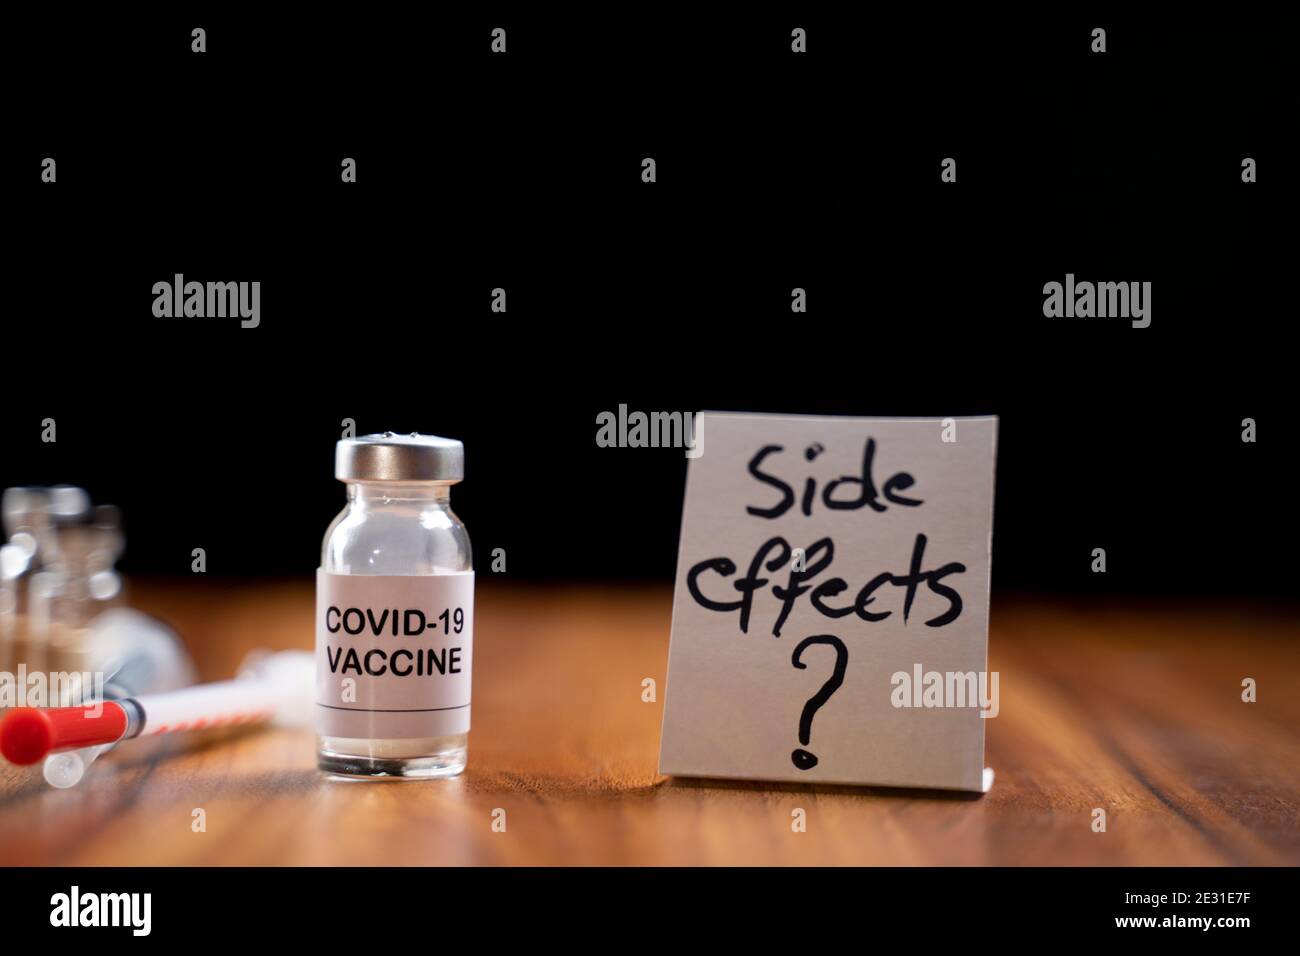 Concept of Coronavirus covid-19 vaccination side effects doubts and questions showing with vaccine bottle Stock Photo